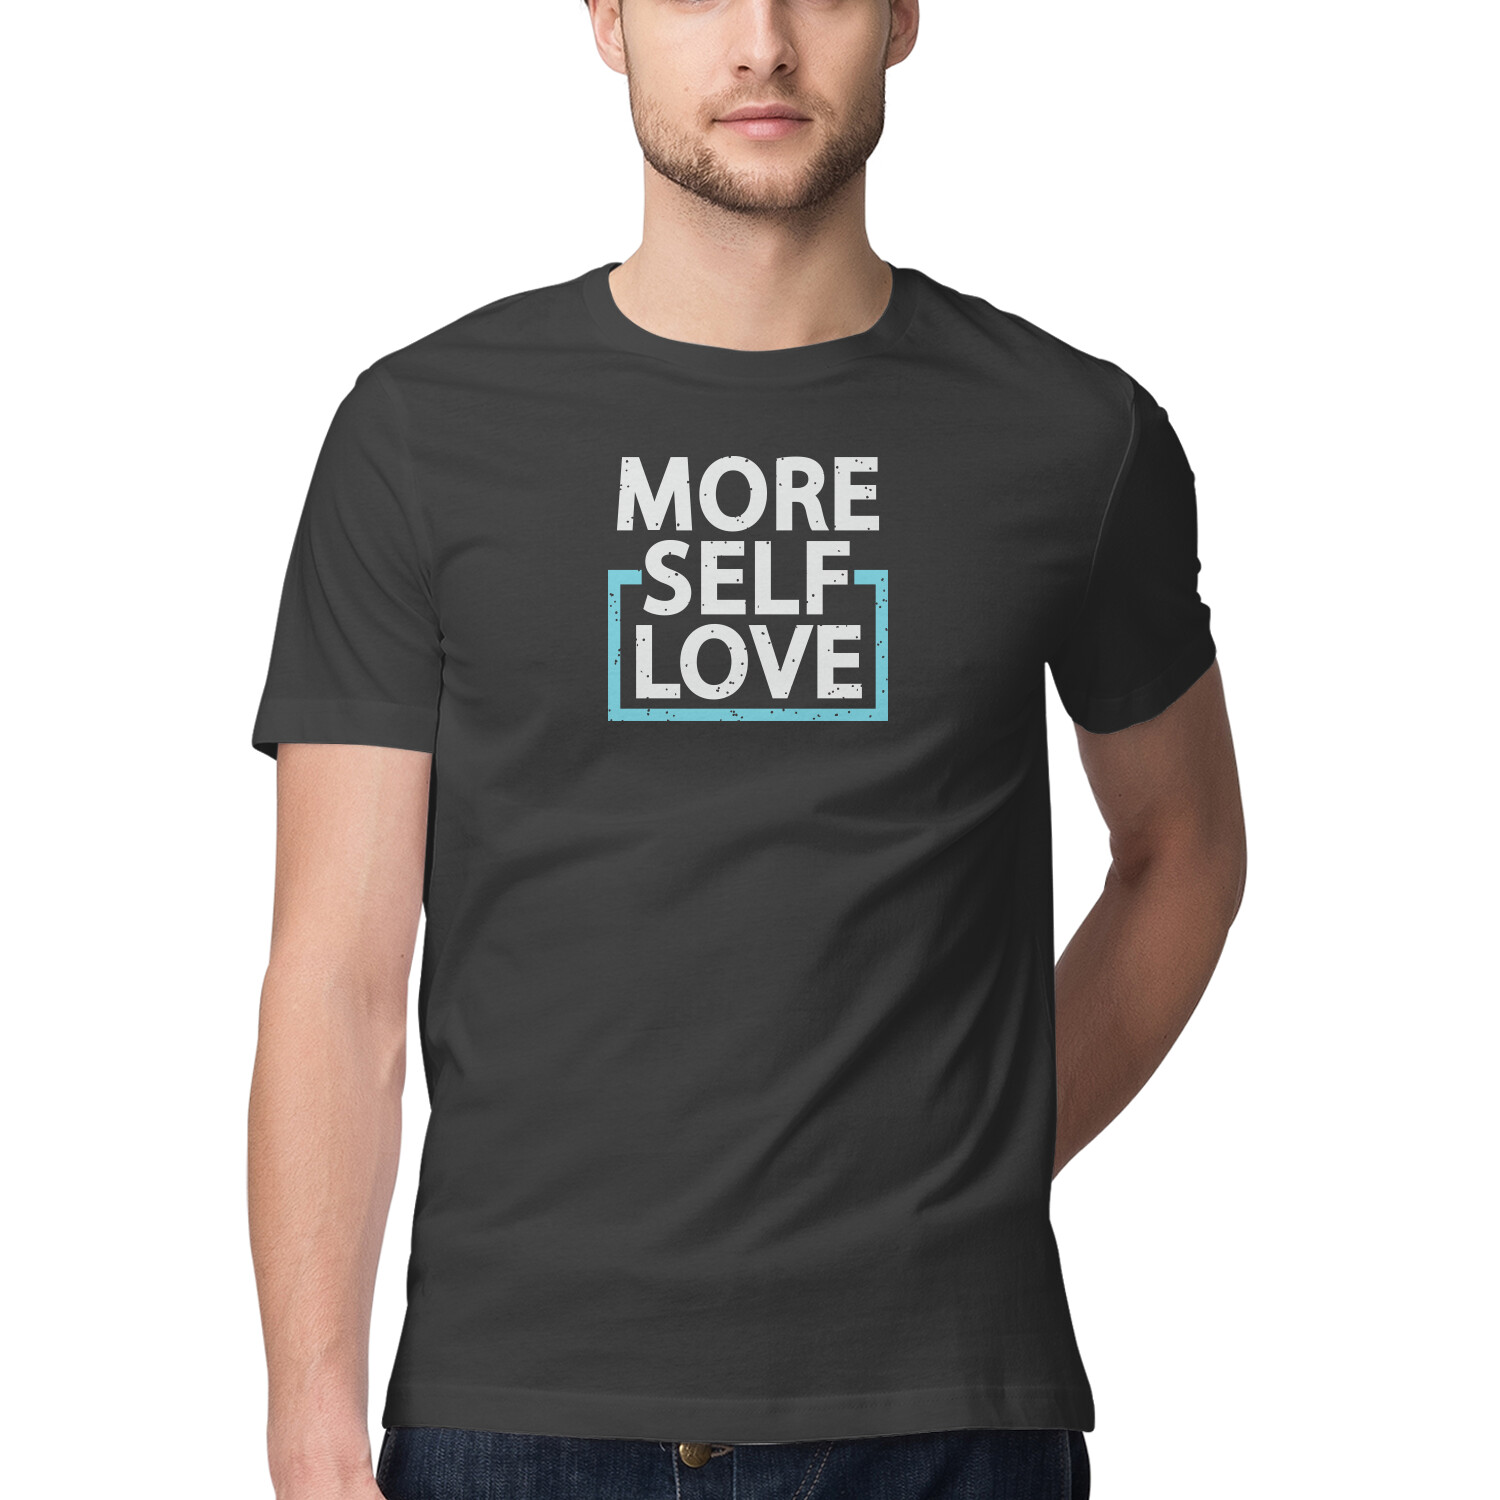 more self love, Funny T-shirt quotes and sayings